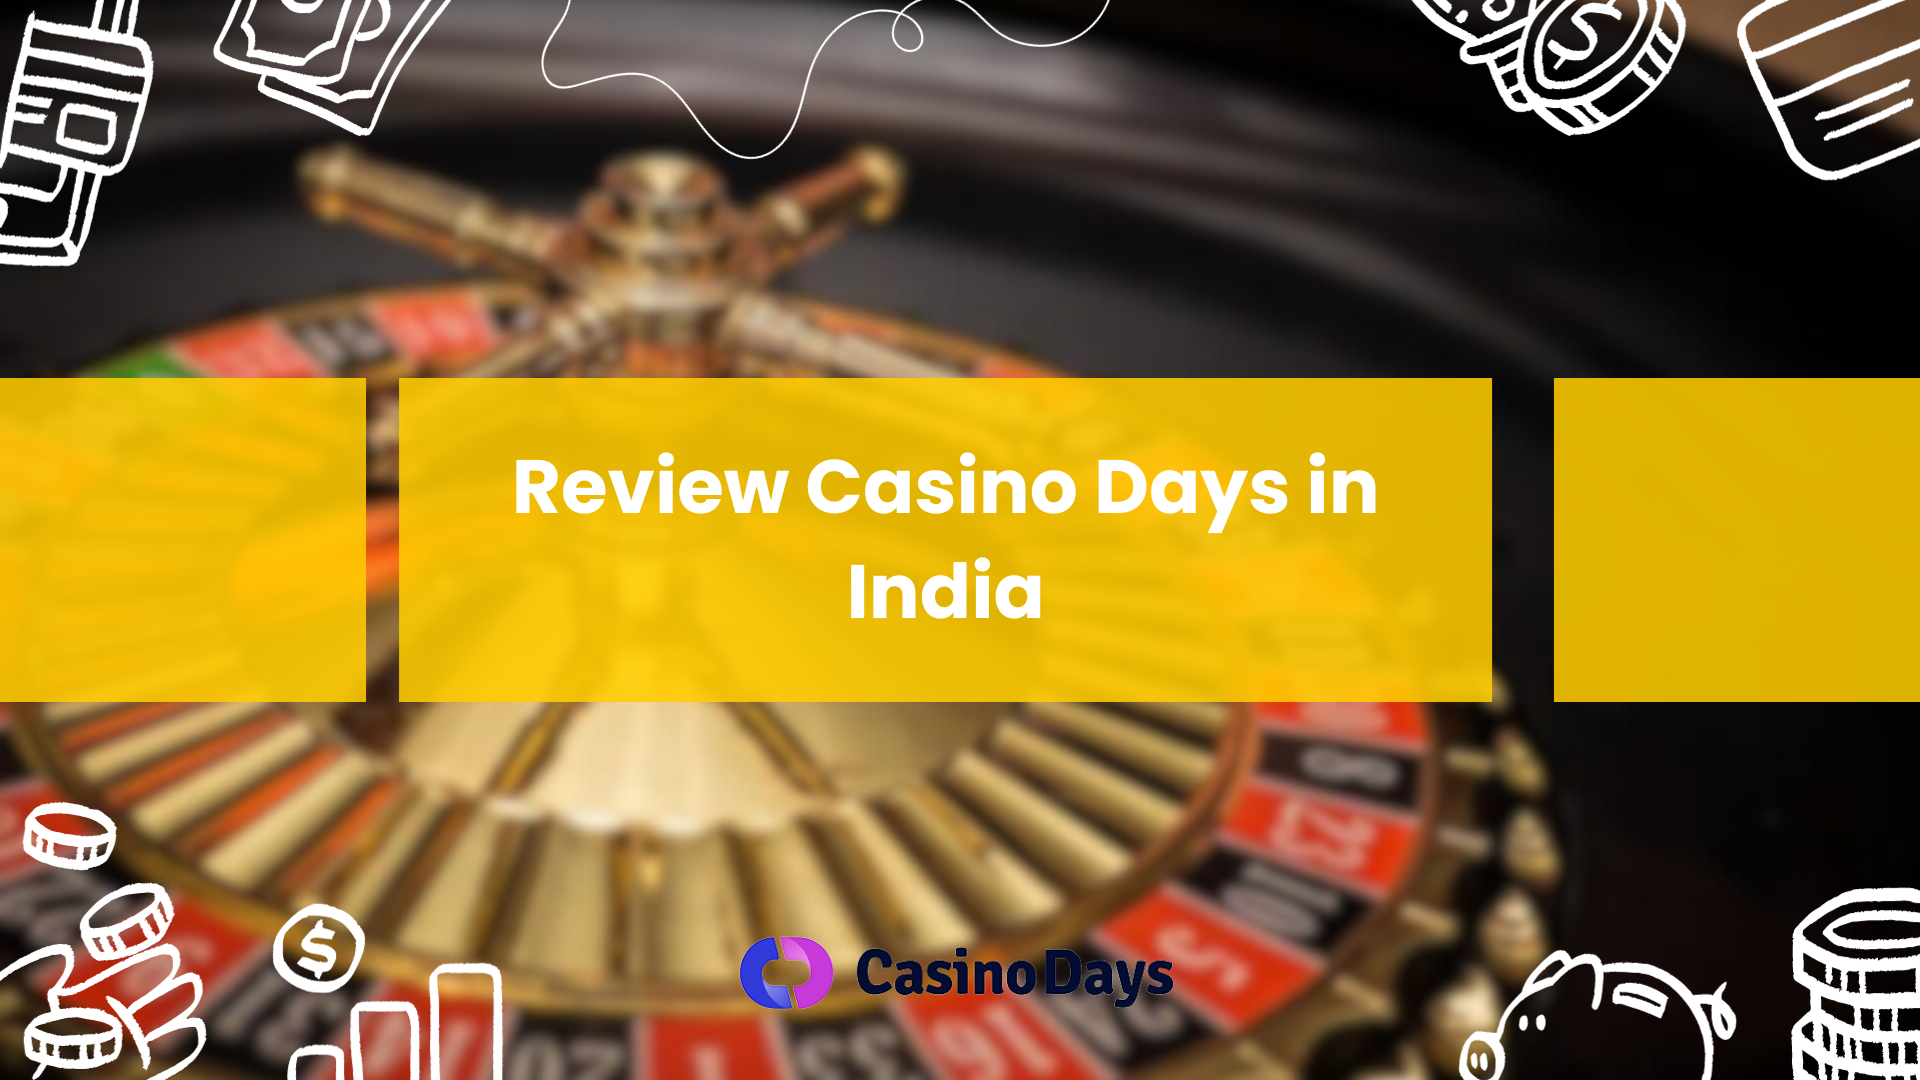 Review Casino Days in India